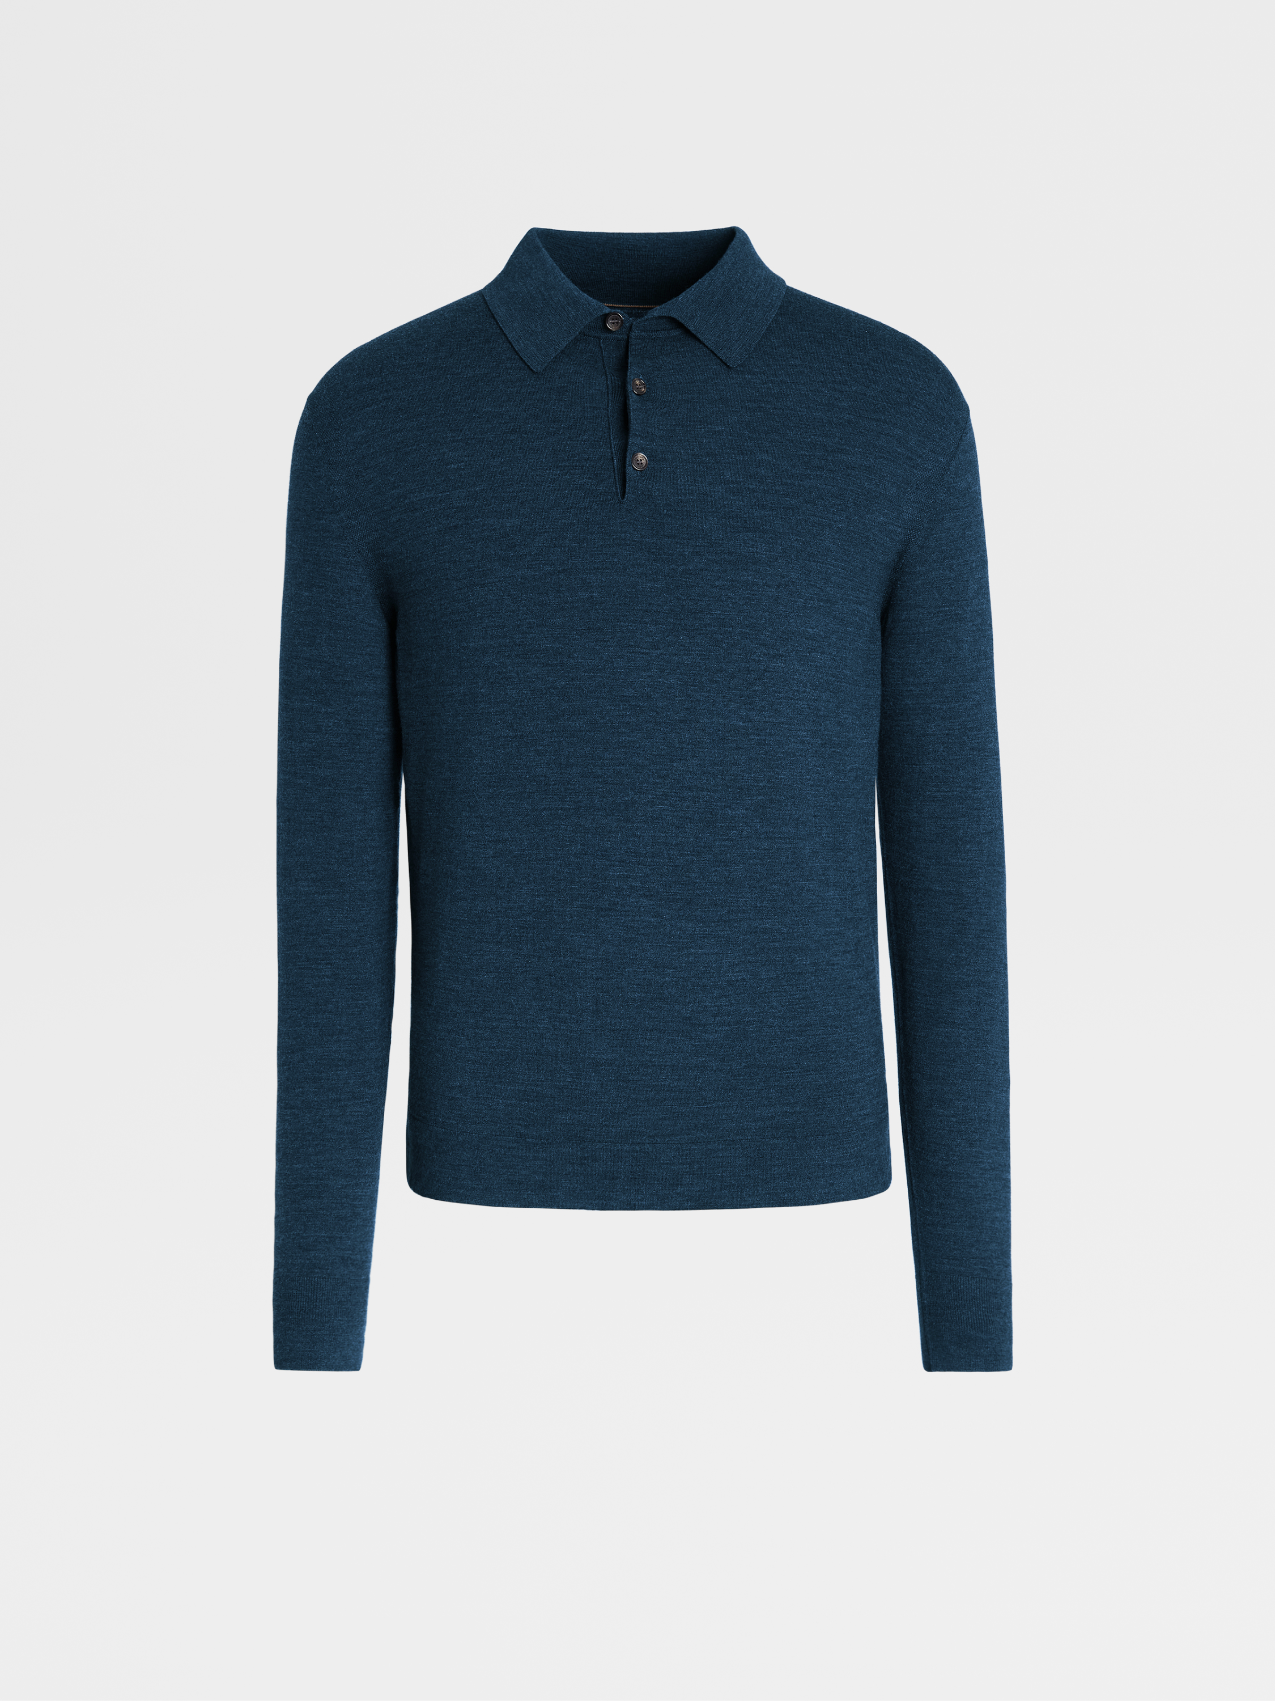 Teal Blue 12milmil12 Wool Knit Polo